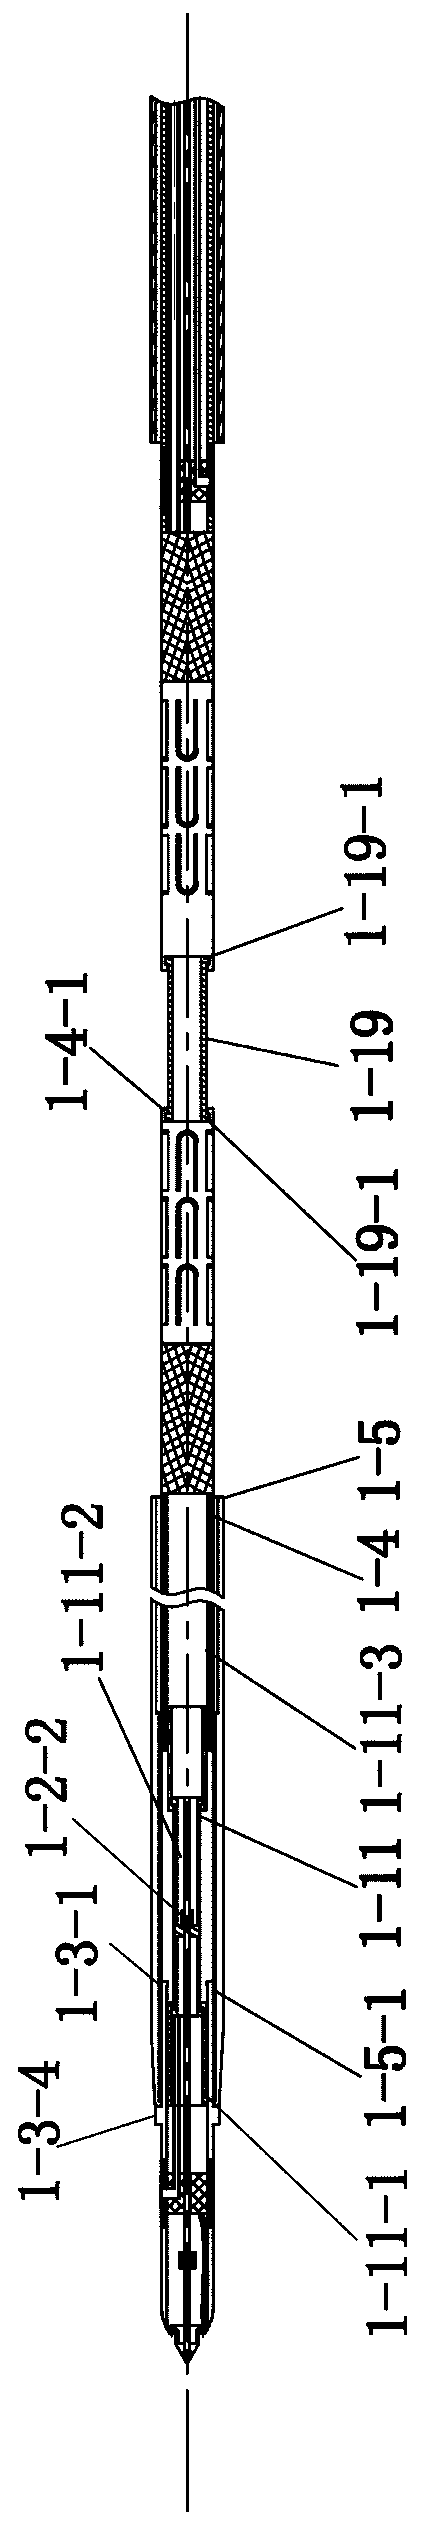 Thrombus removal device of thrombus removal system